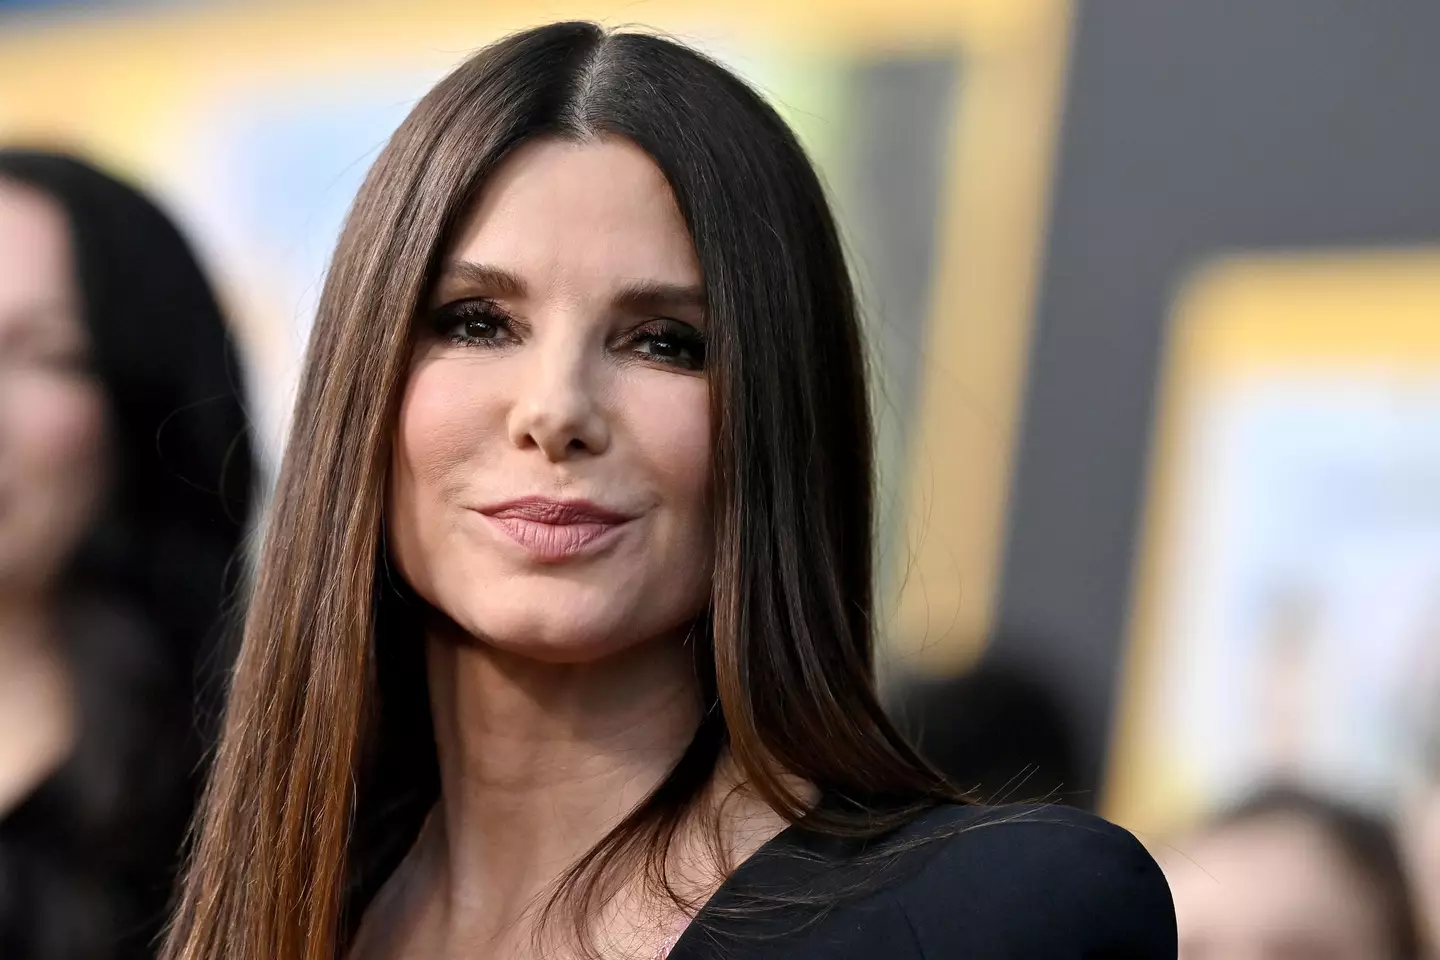 Sandra Bullock was applauded for her composure during a 911 call. (Axelle/Bauer-Griffin/FilmMagic)